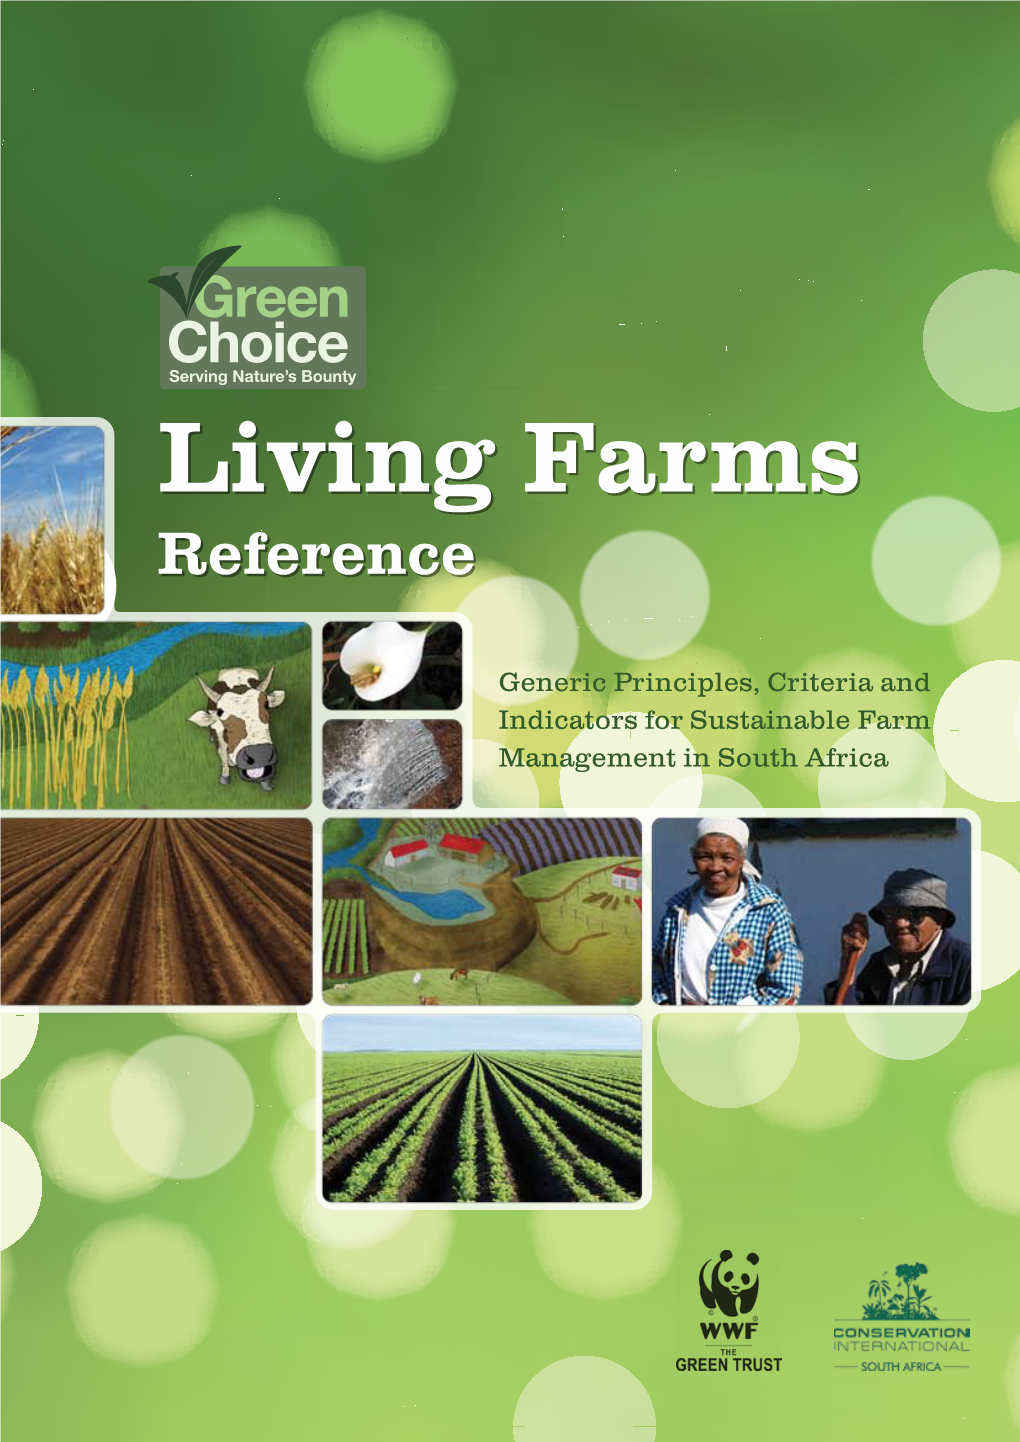 The Green Choice Living Farms Reference 2009/2010 Version, A